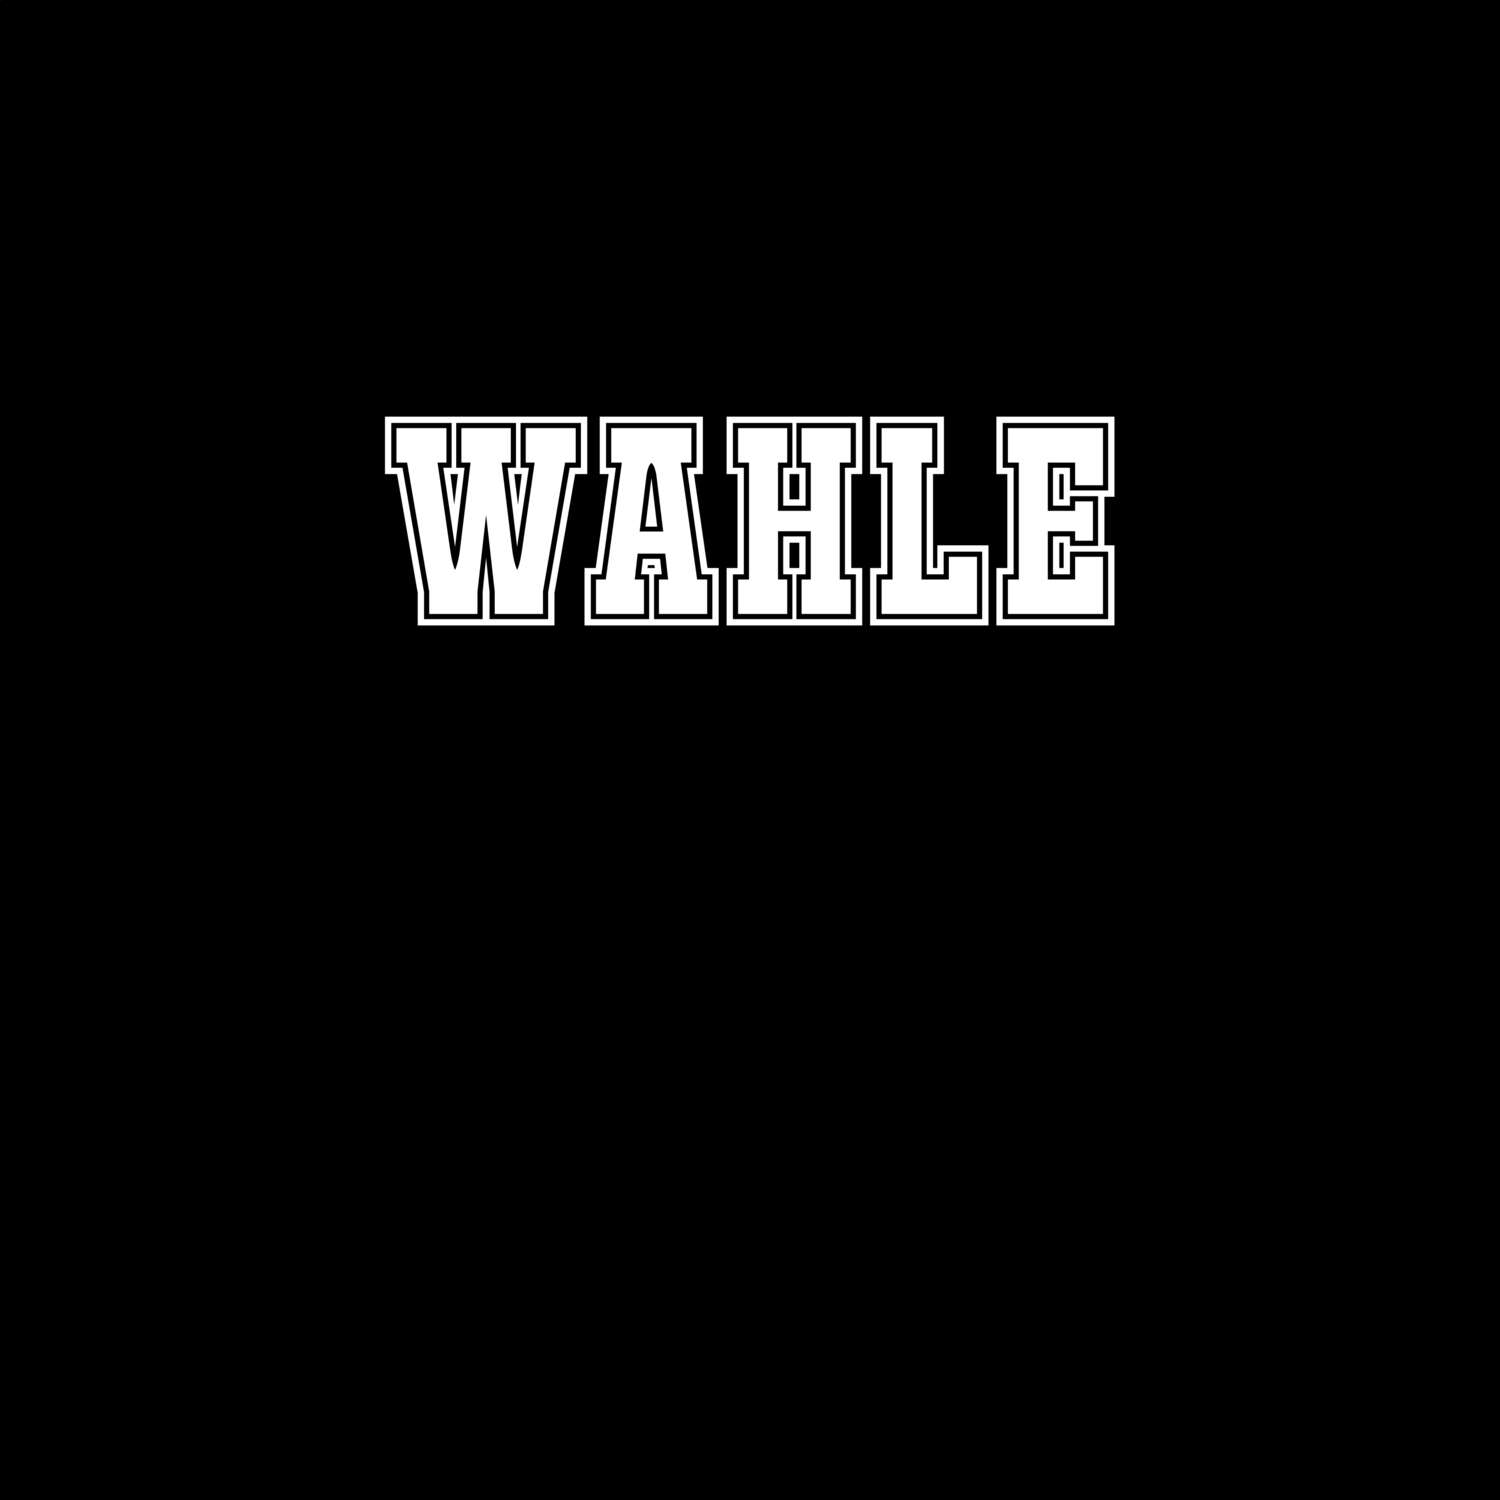 Wahle T-Shirt »Classic«